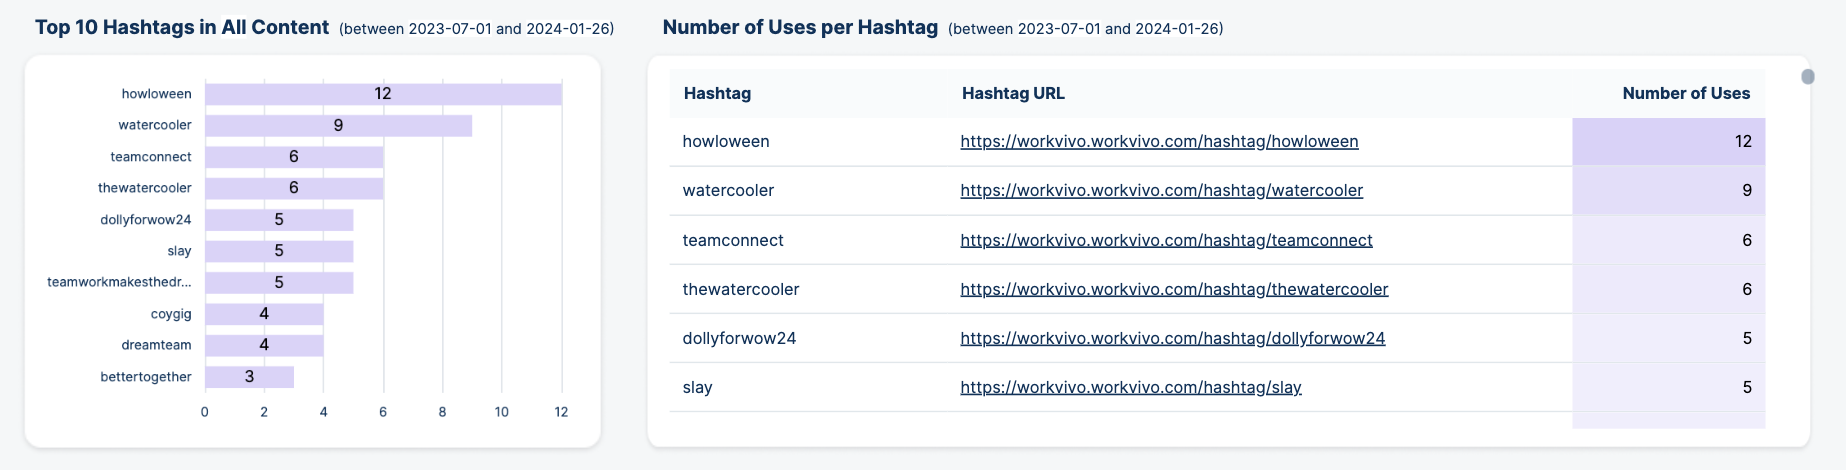 Top 10 Hashtags.png